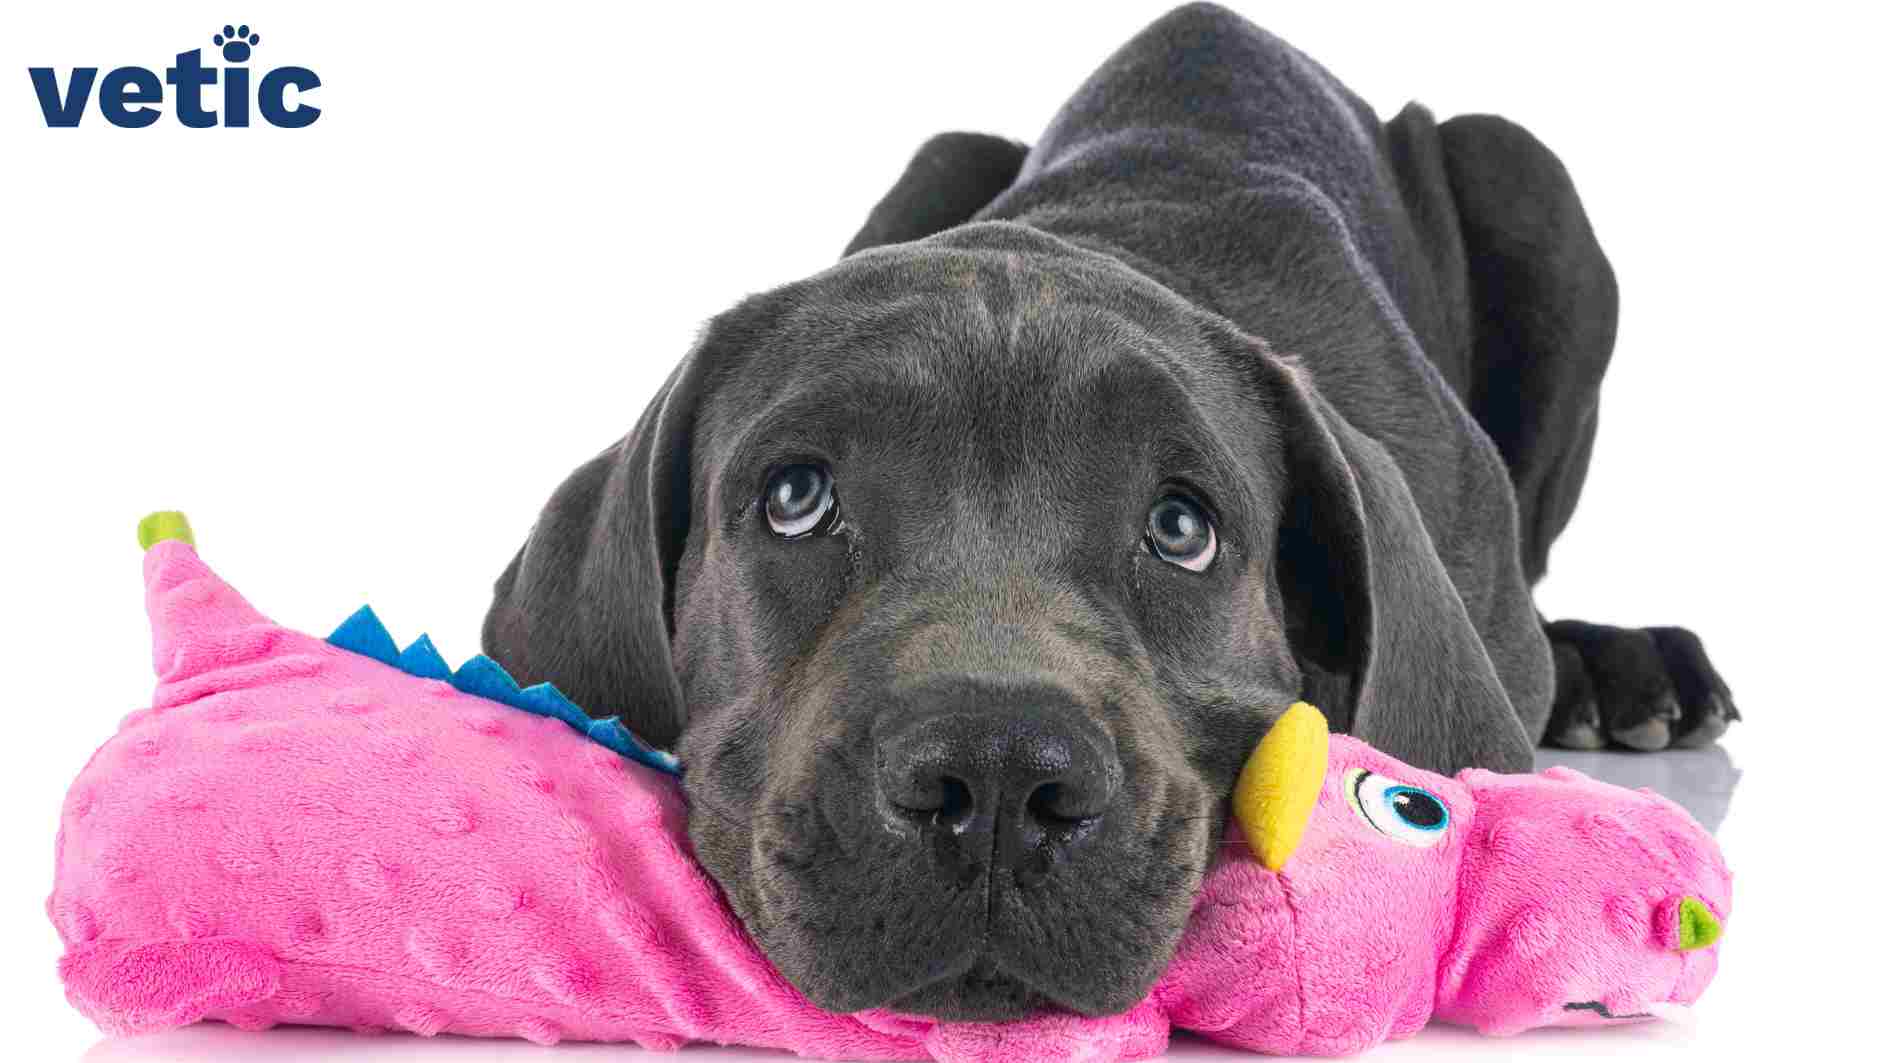 A black great dane with light grey eyes literally making a puppy face at the photographer while resting their face on a fuchsia dinosaur plushie toy.